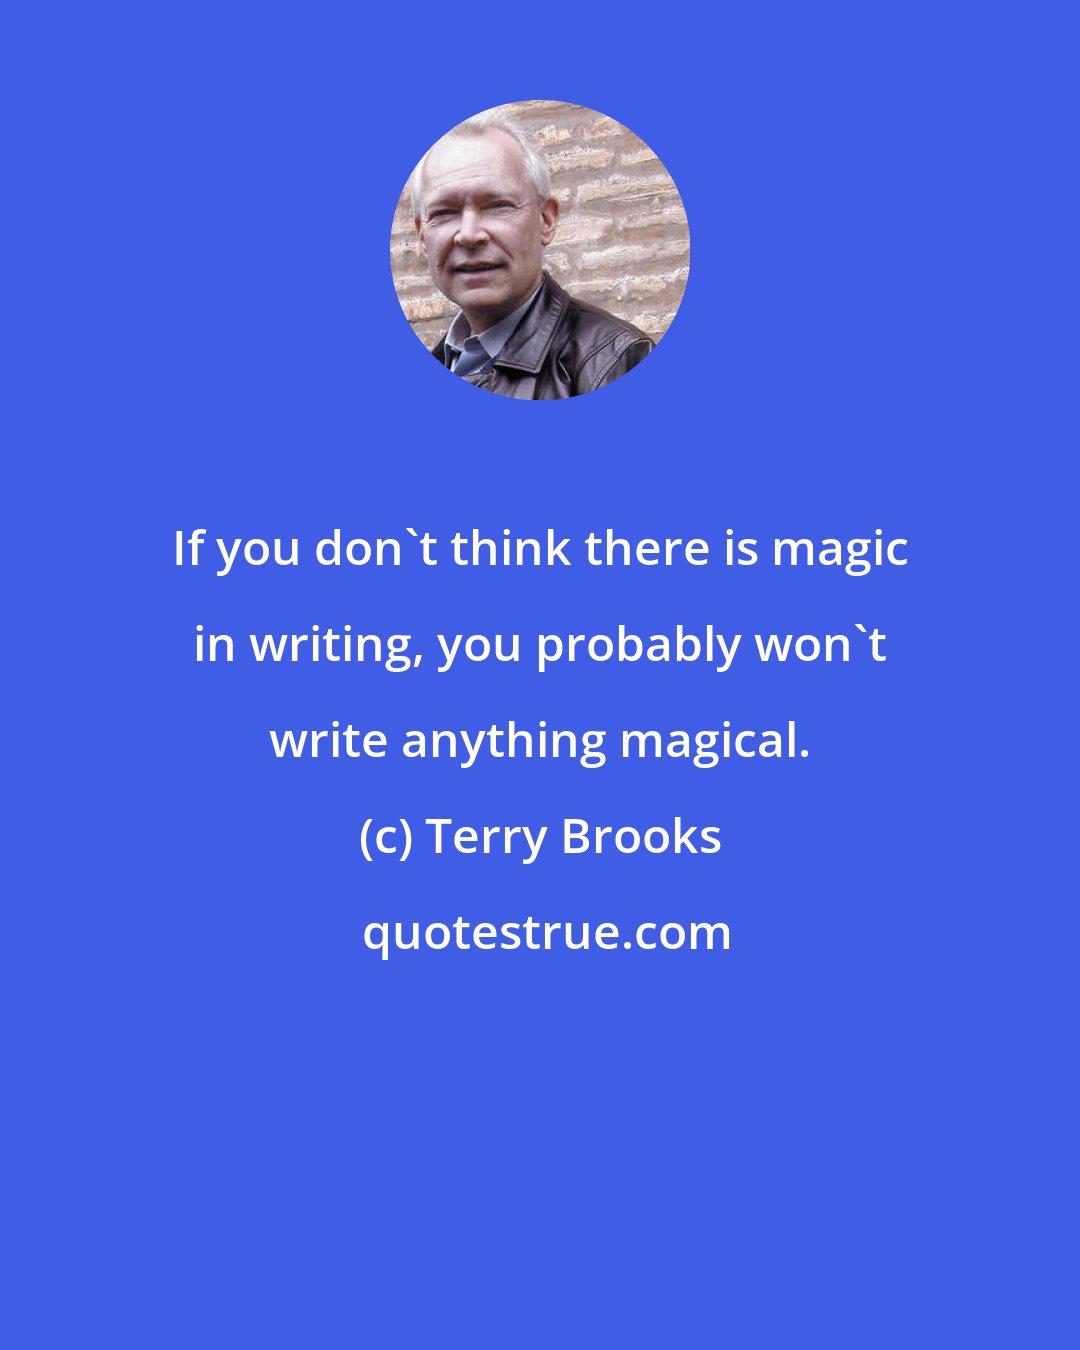 Terry Brooks: If you don't think there is magic in writing, you probably won't write anything magical.